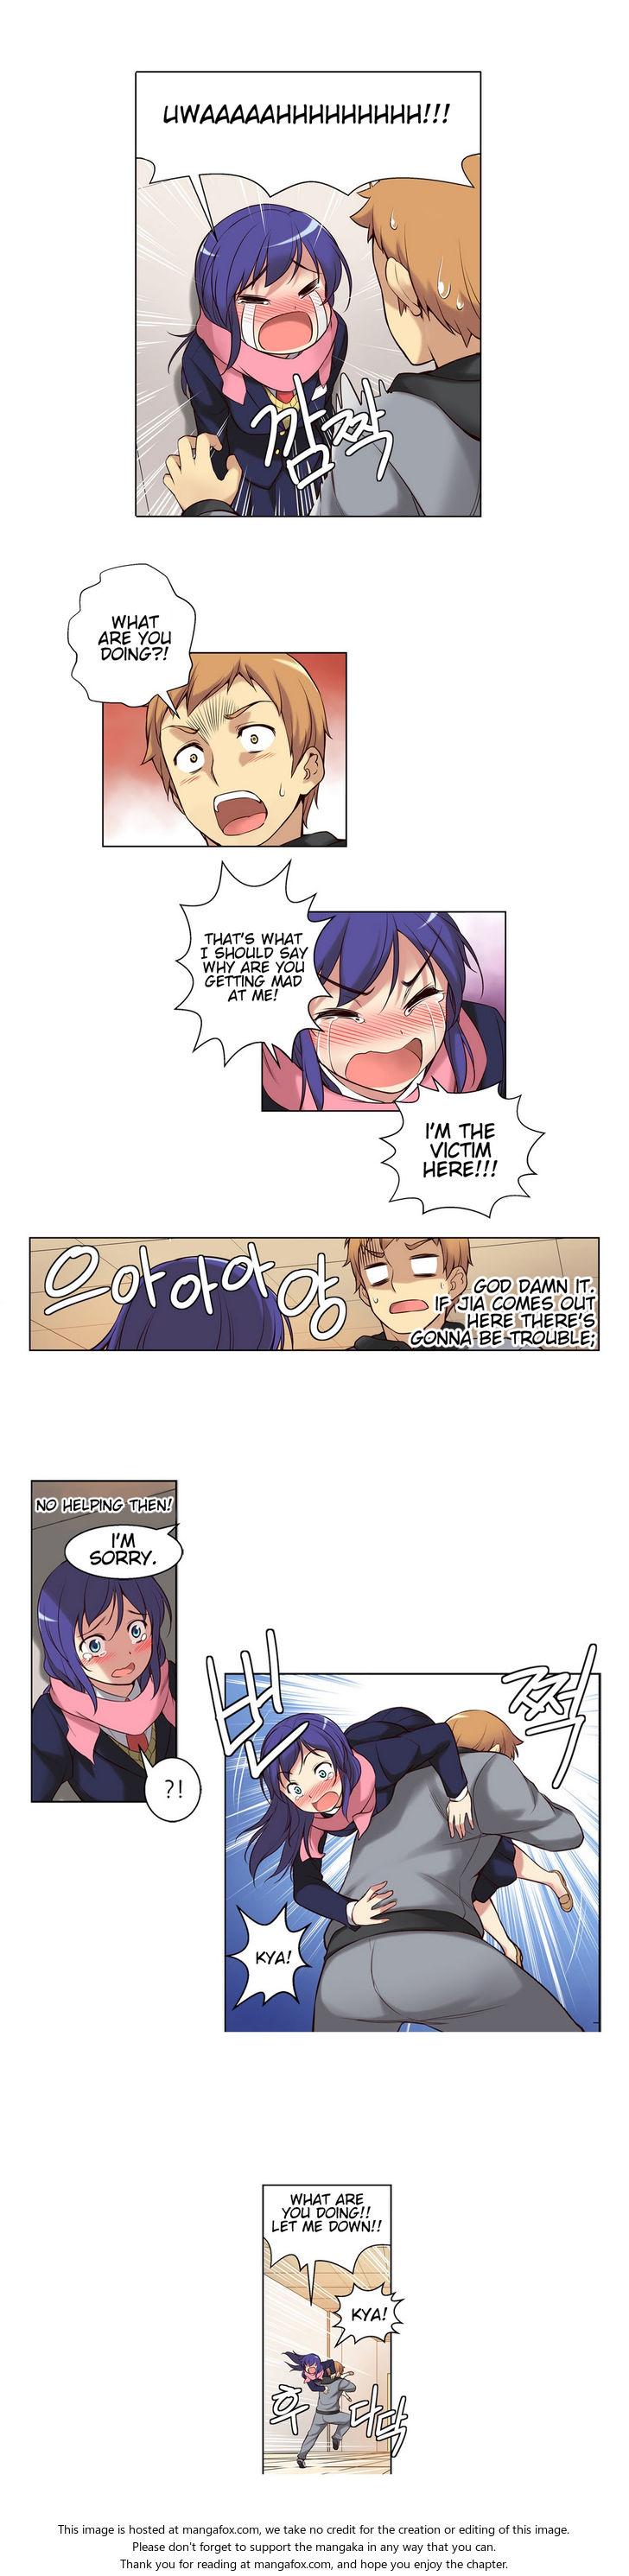 [Donggul Gom] She is Young (English) Part 1/2 42